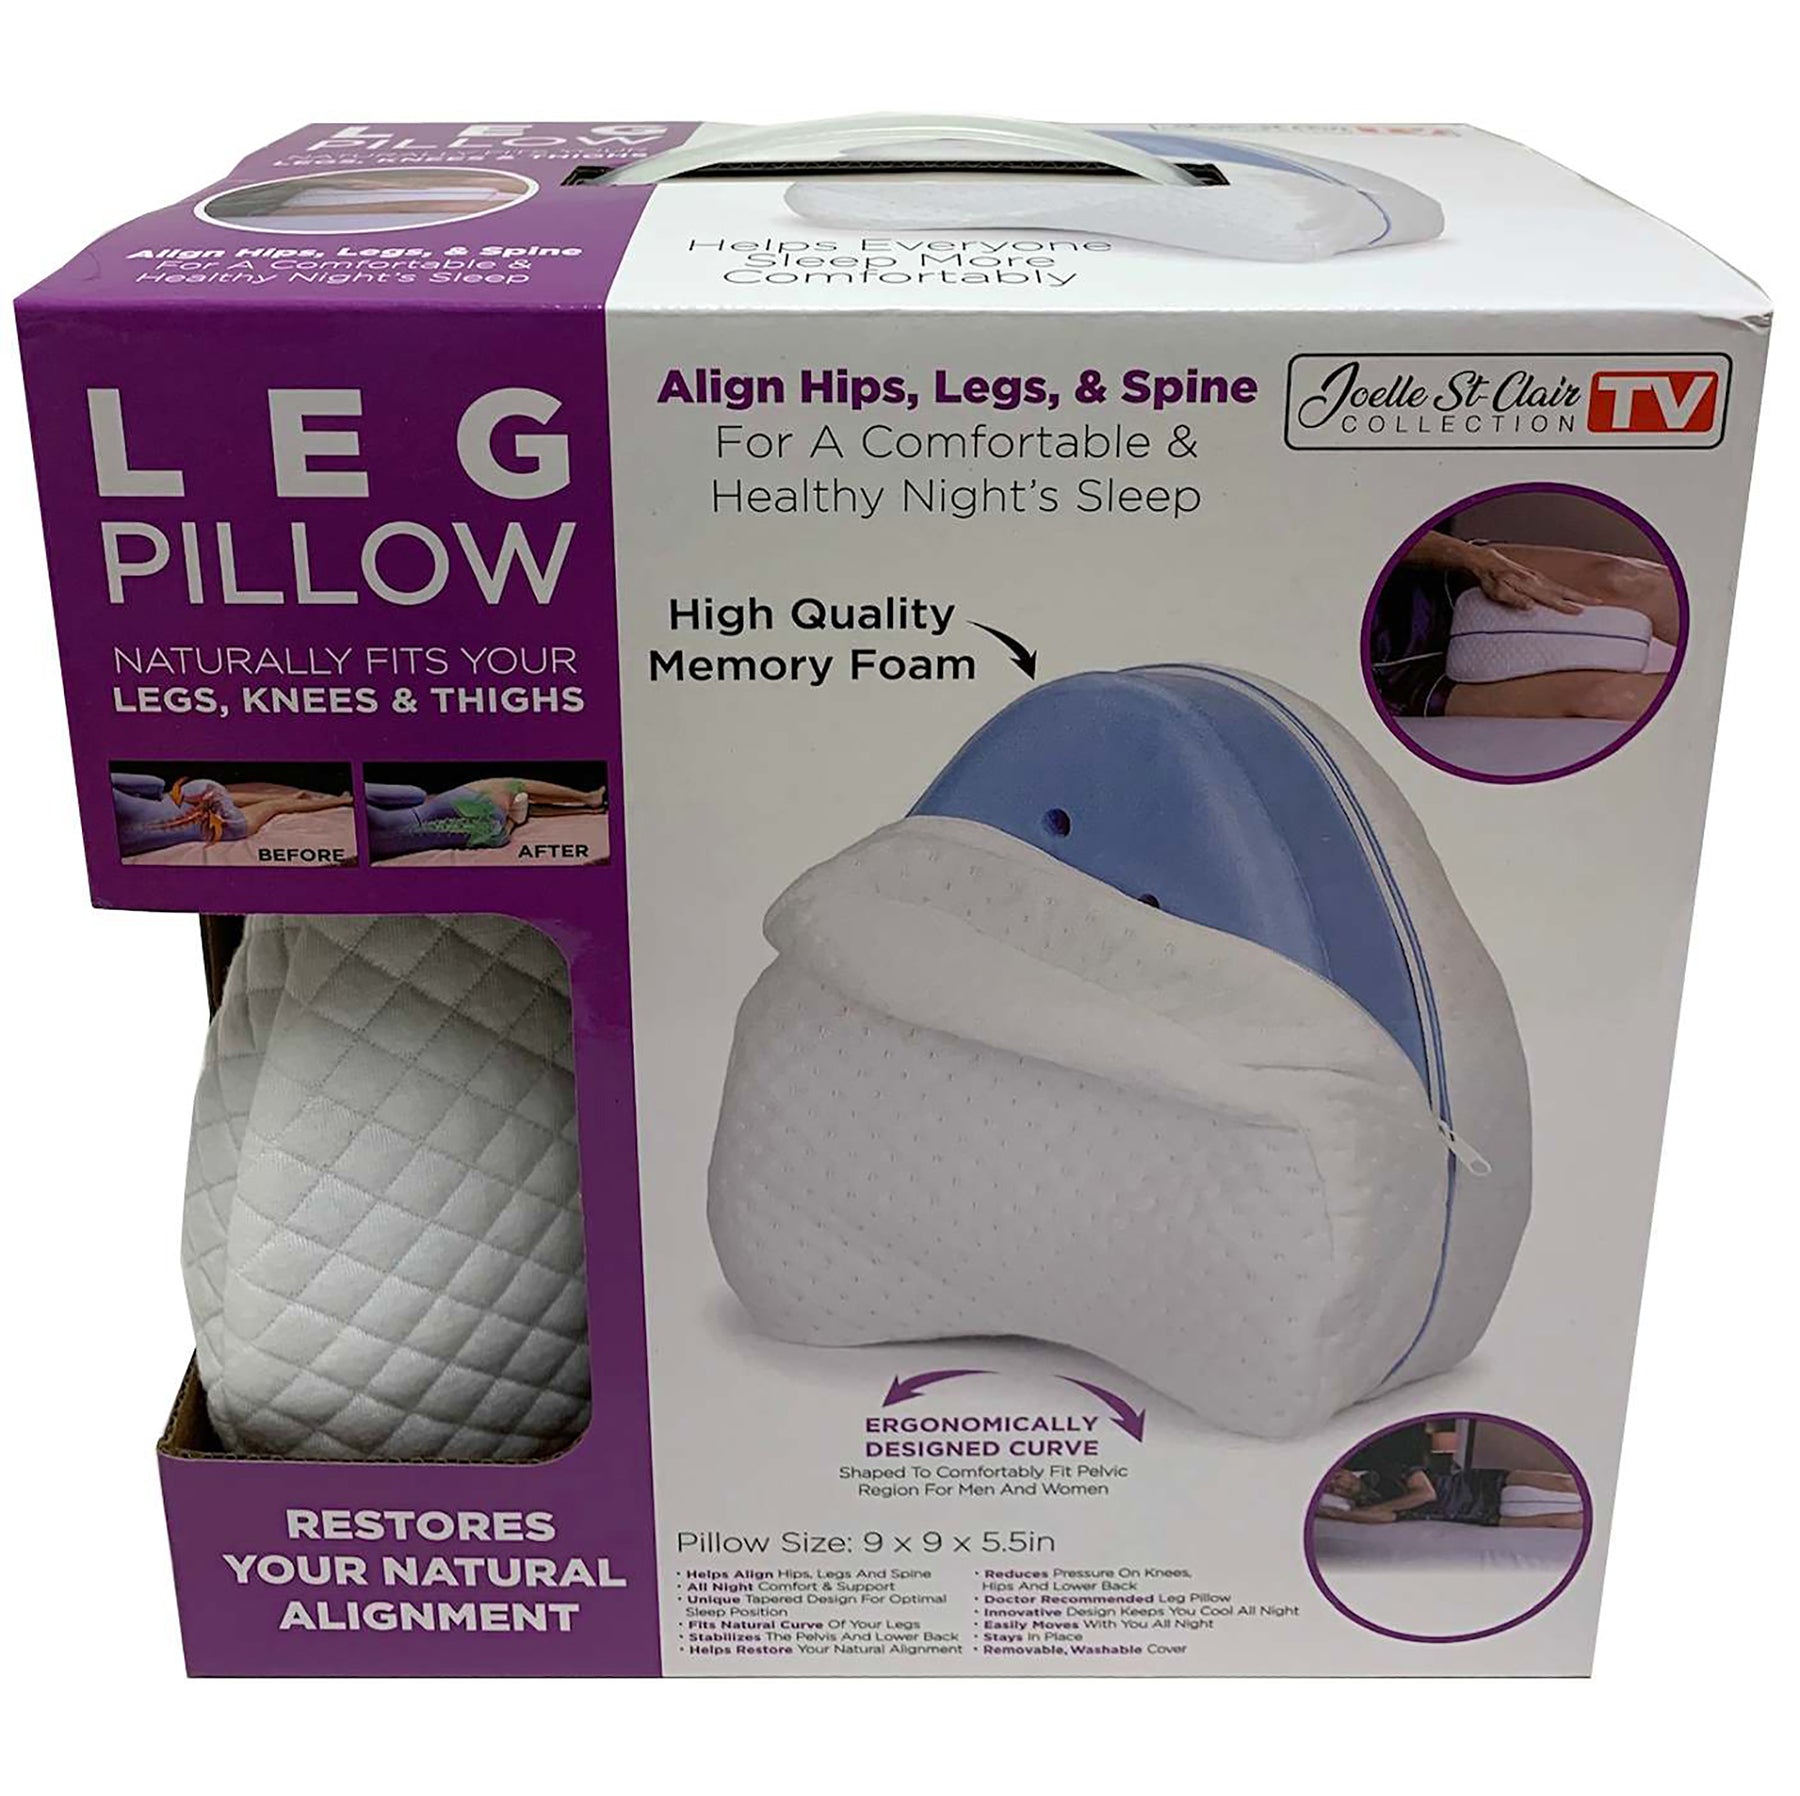 Joelle St-Clair Leg Pillow - Removable and Washable Cover 9x9x5.5in